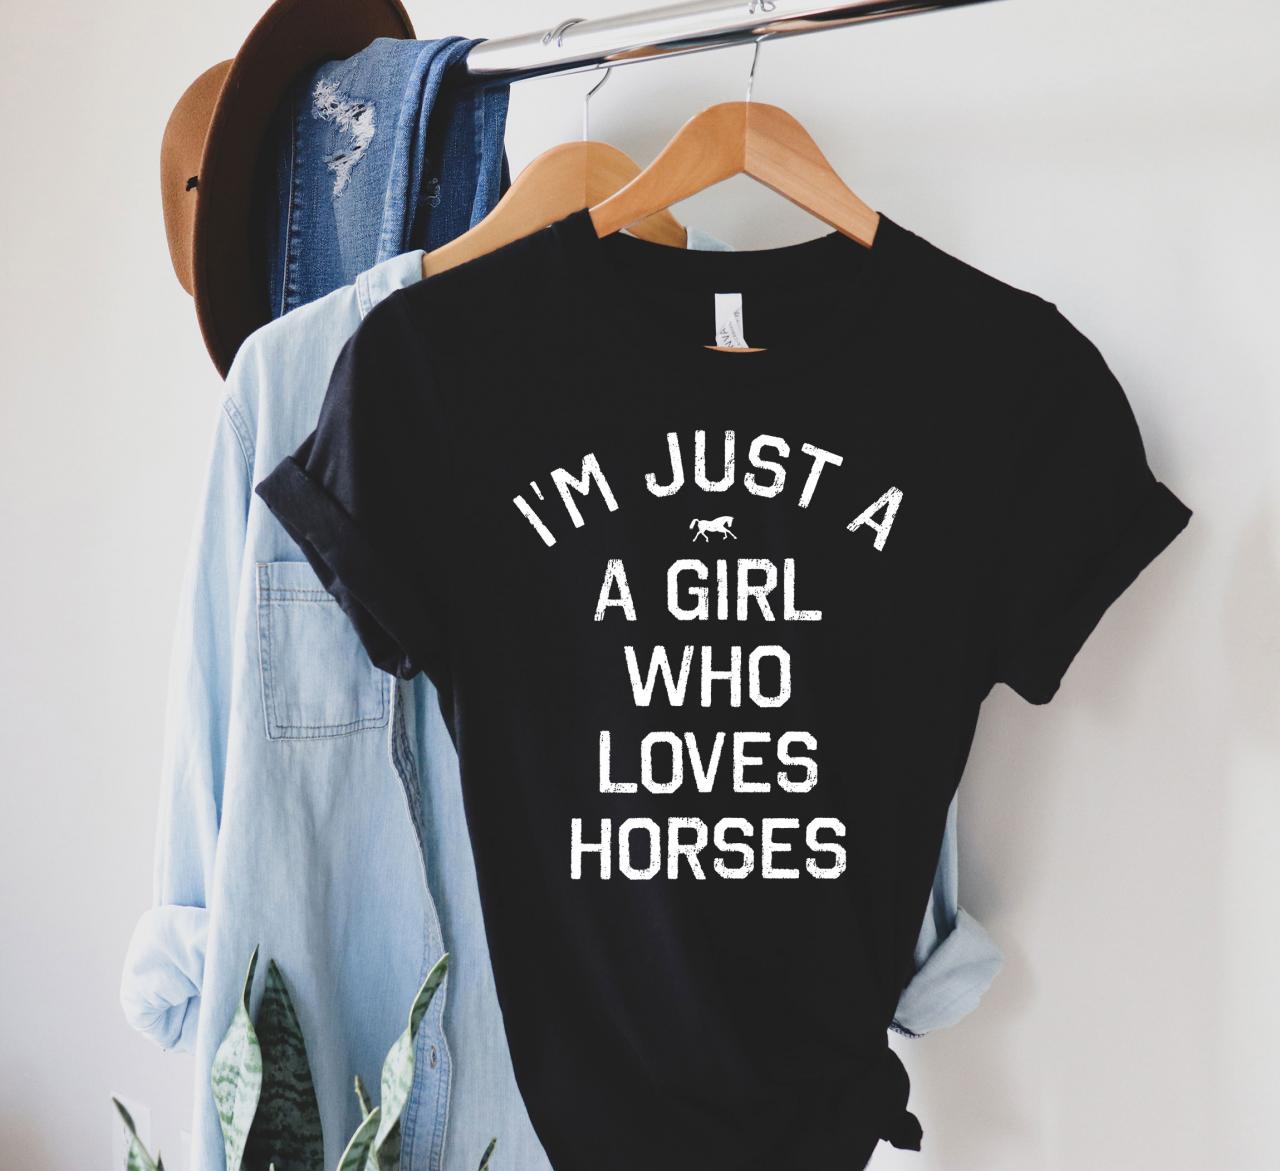 Horse Lover Tshirt, Animal Lover, Horse Tees, Cute Gift, Funny Horse, Farm Shirts, Horse Gift, I'm Just A Girl Who Loves Horses Shirt,